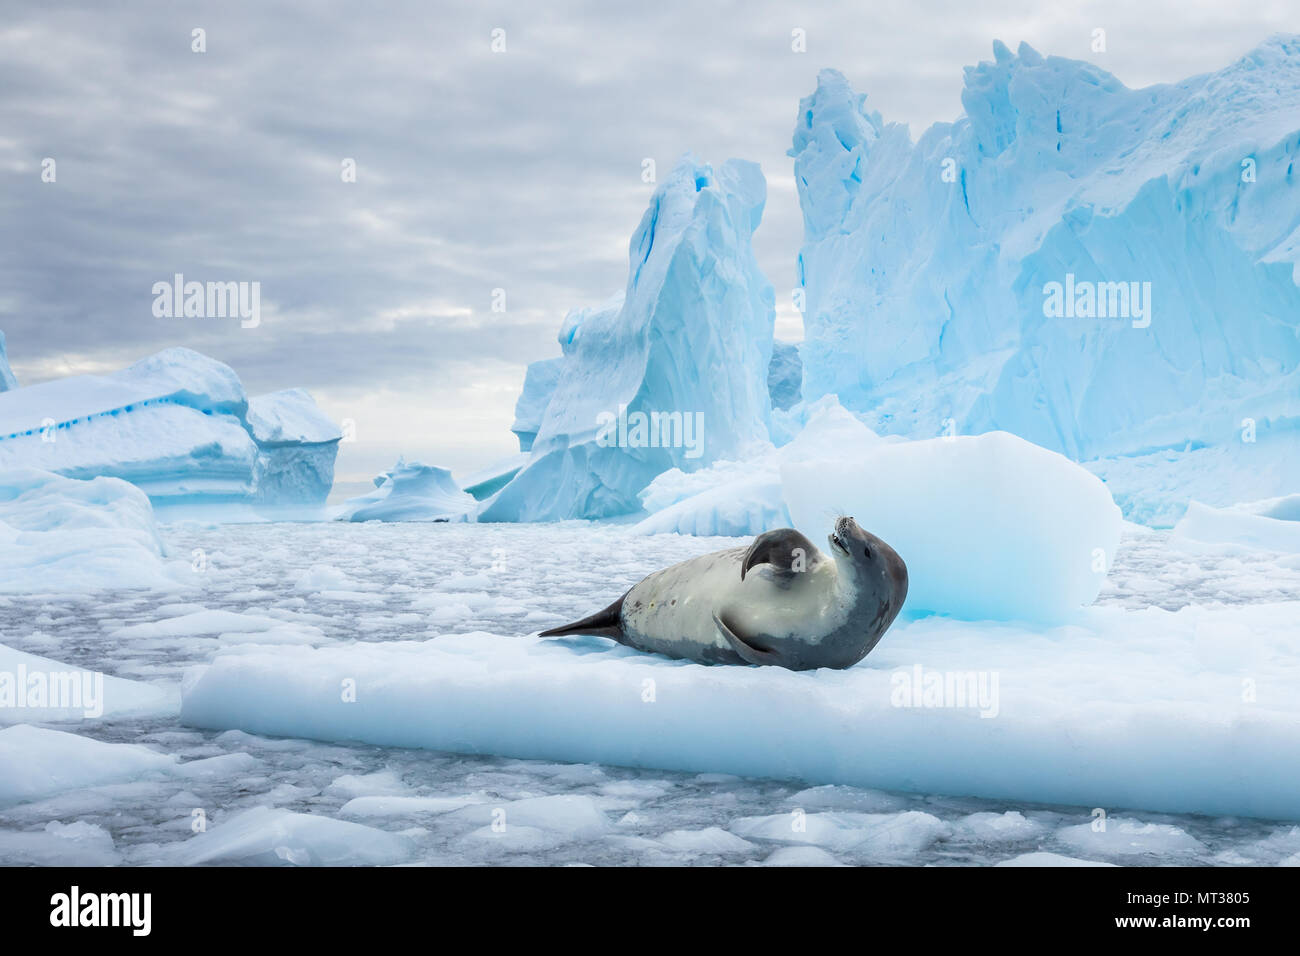 Crabeater seal (lobodon carcinophaga) resting on drifting pack ice or icefloe between blue icebergs and freezing sea water landscape in the Antarctic  Stock Photo